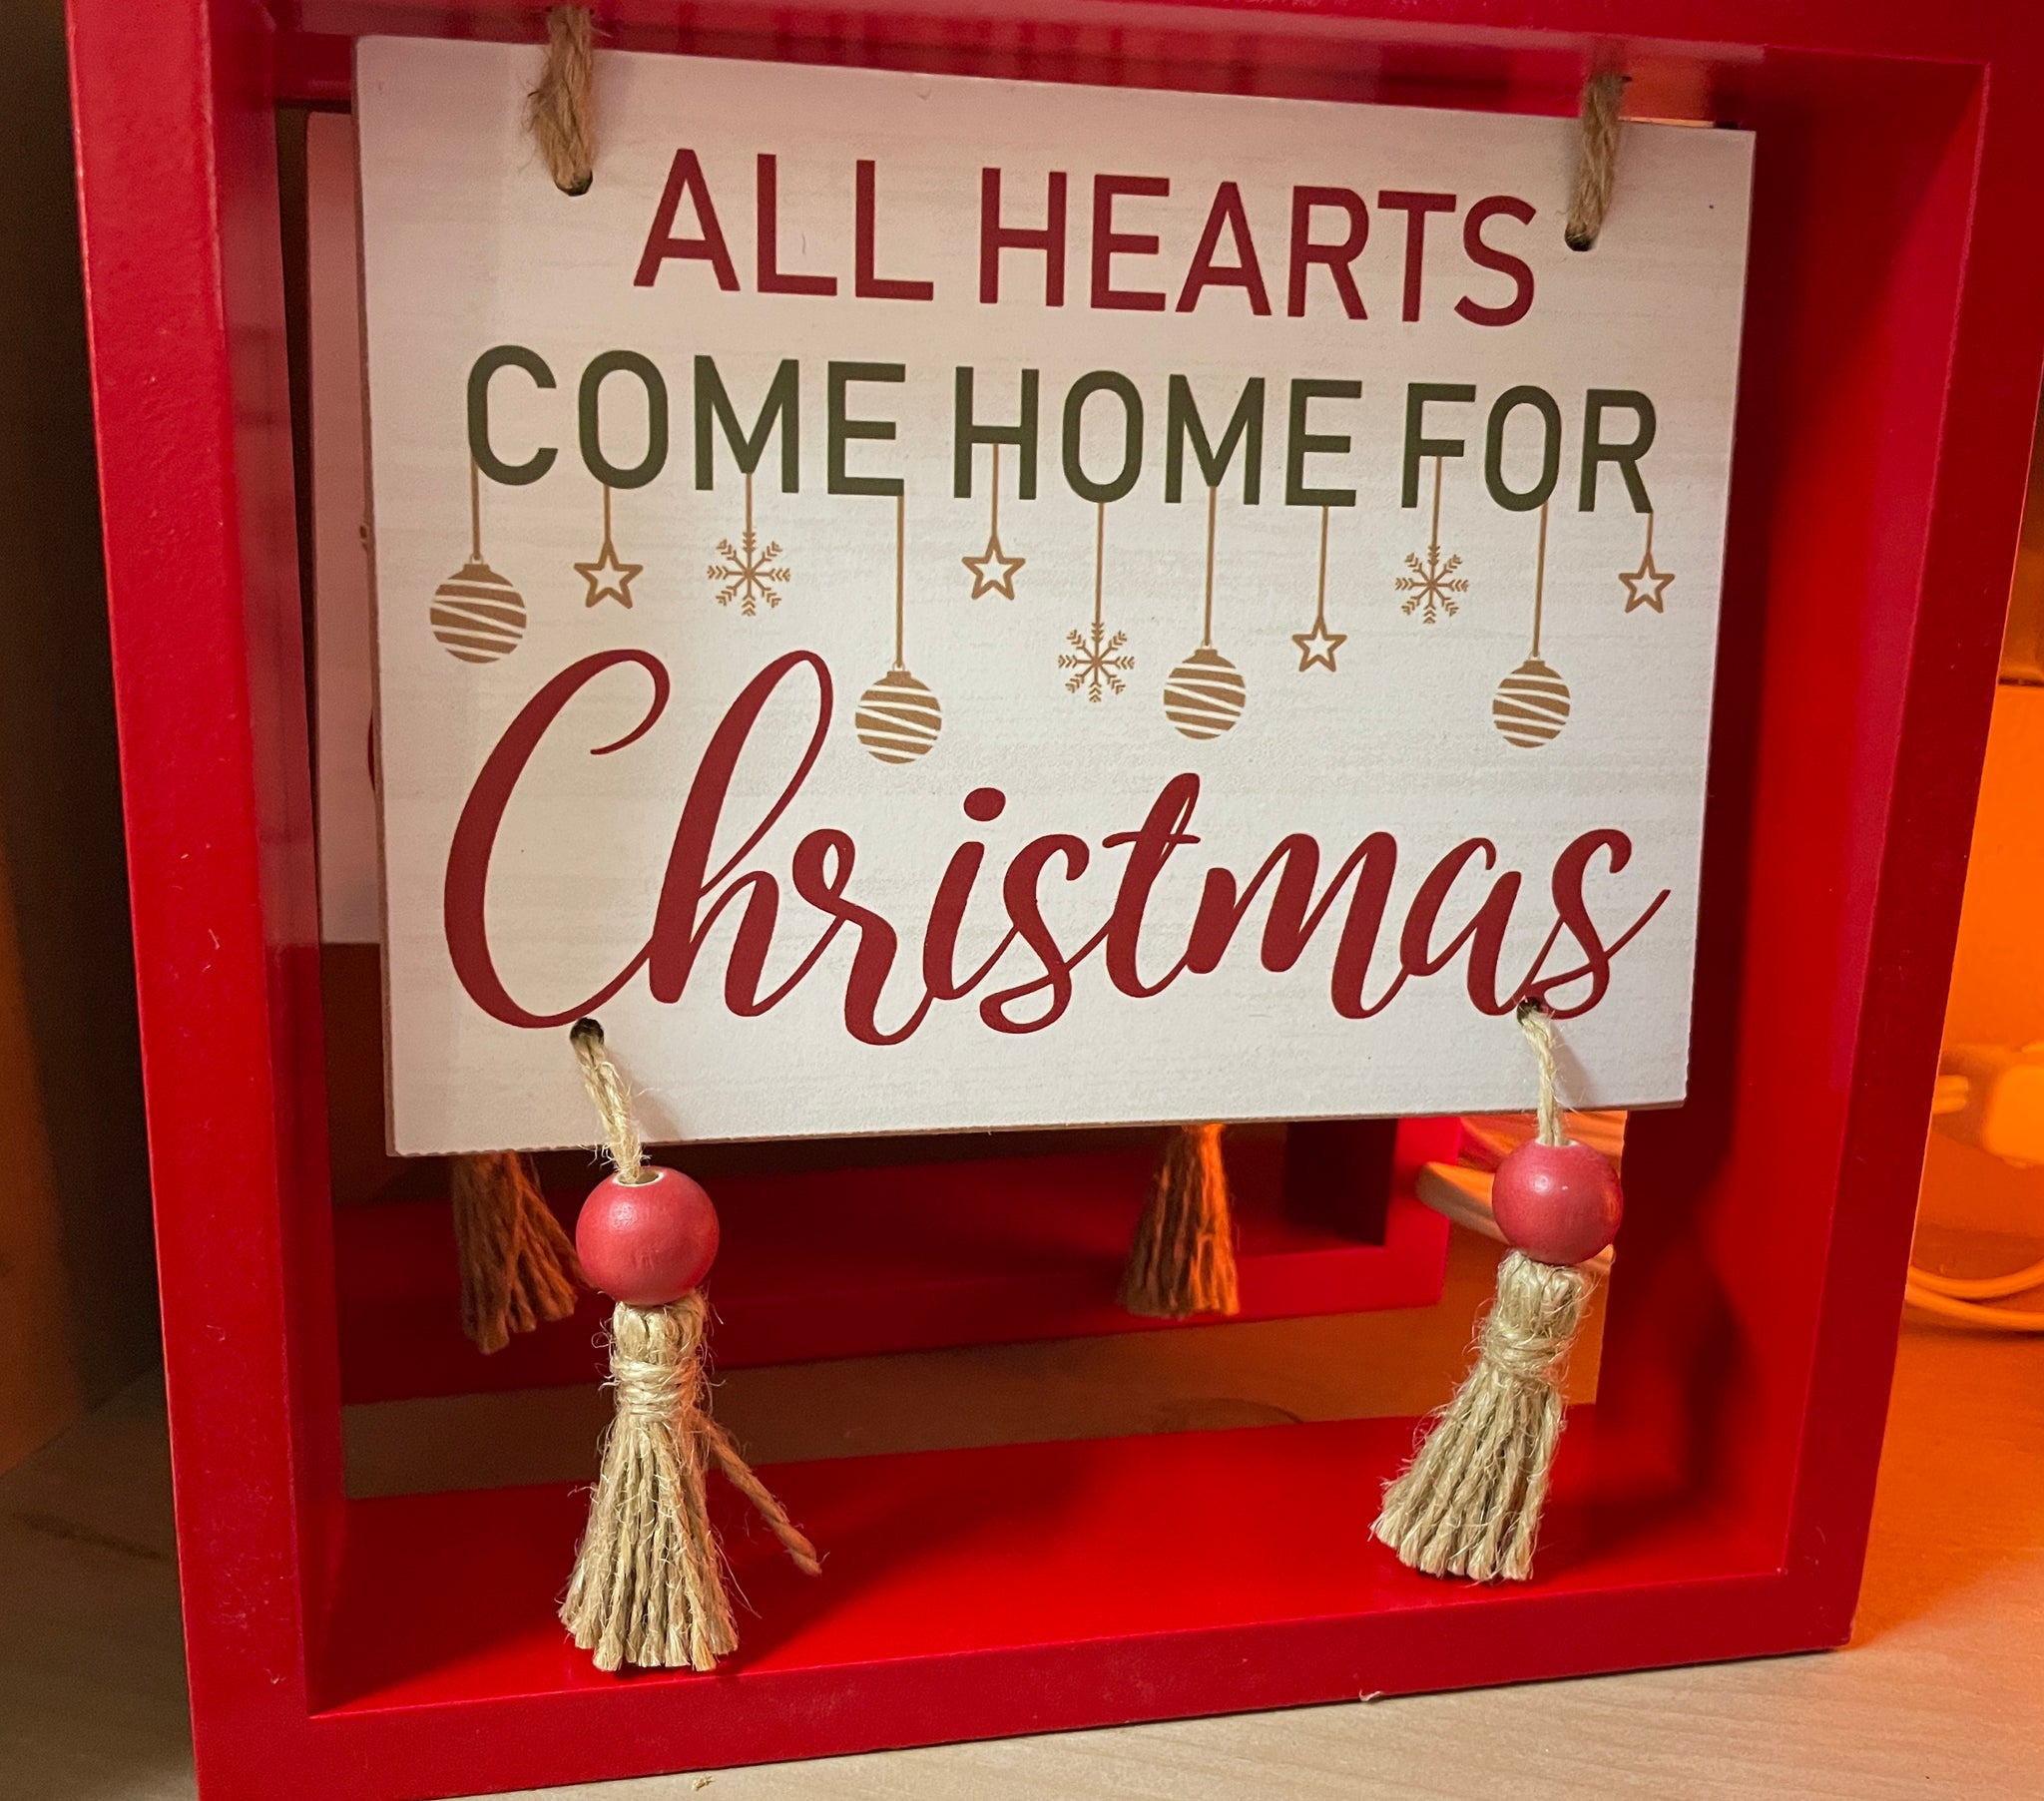 All Hearts Come Home for Christmas